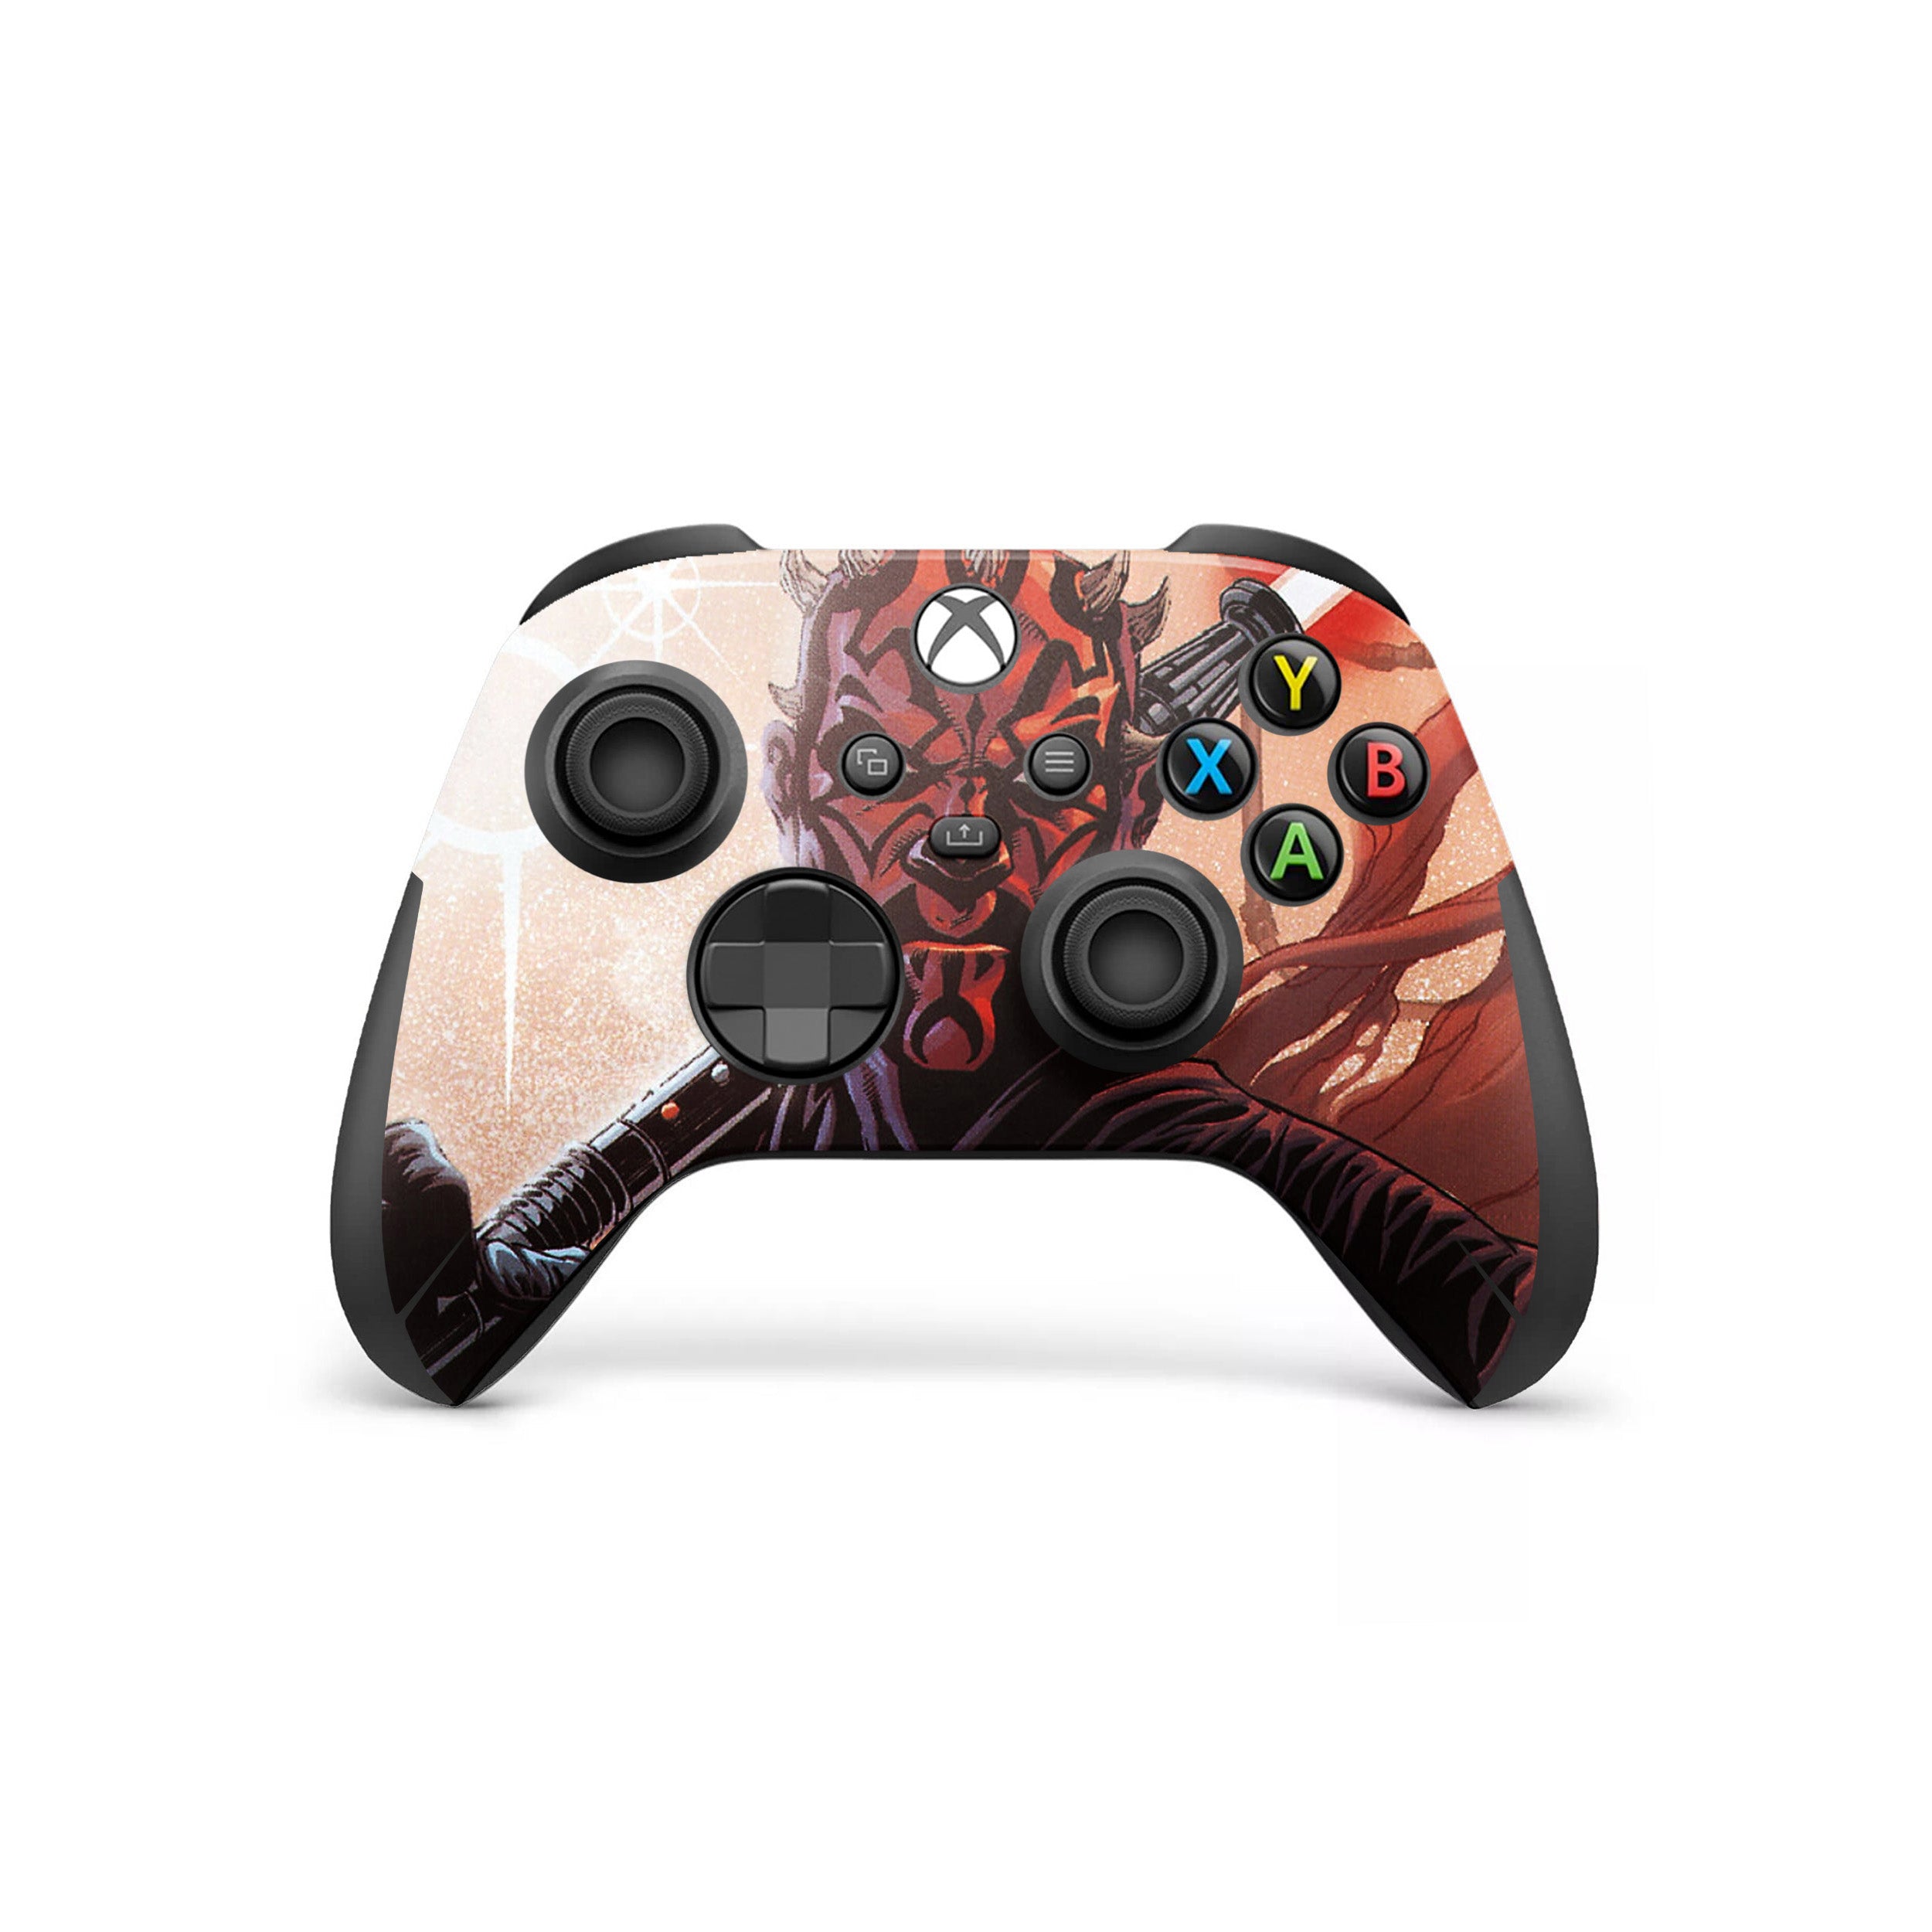 A video game skin featuring a Star Wars Darth Maul design for the Xbox Wireless Controller.